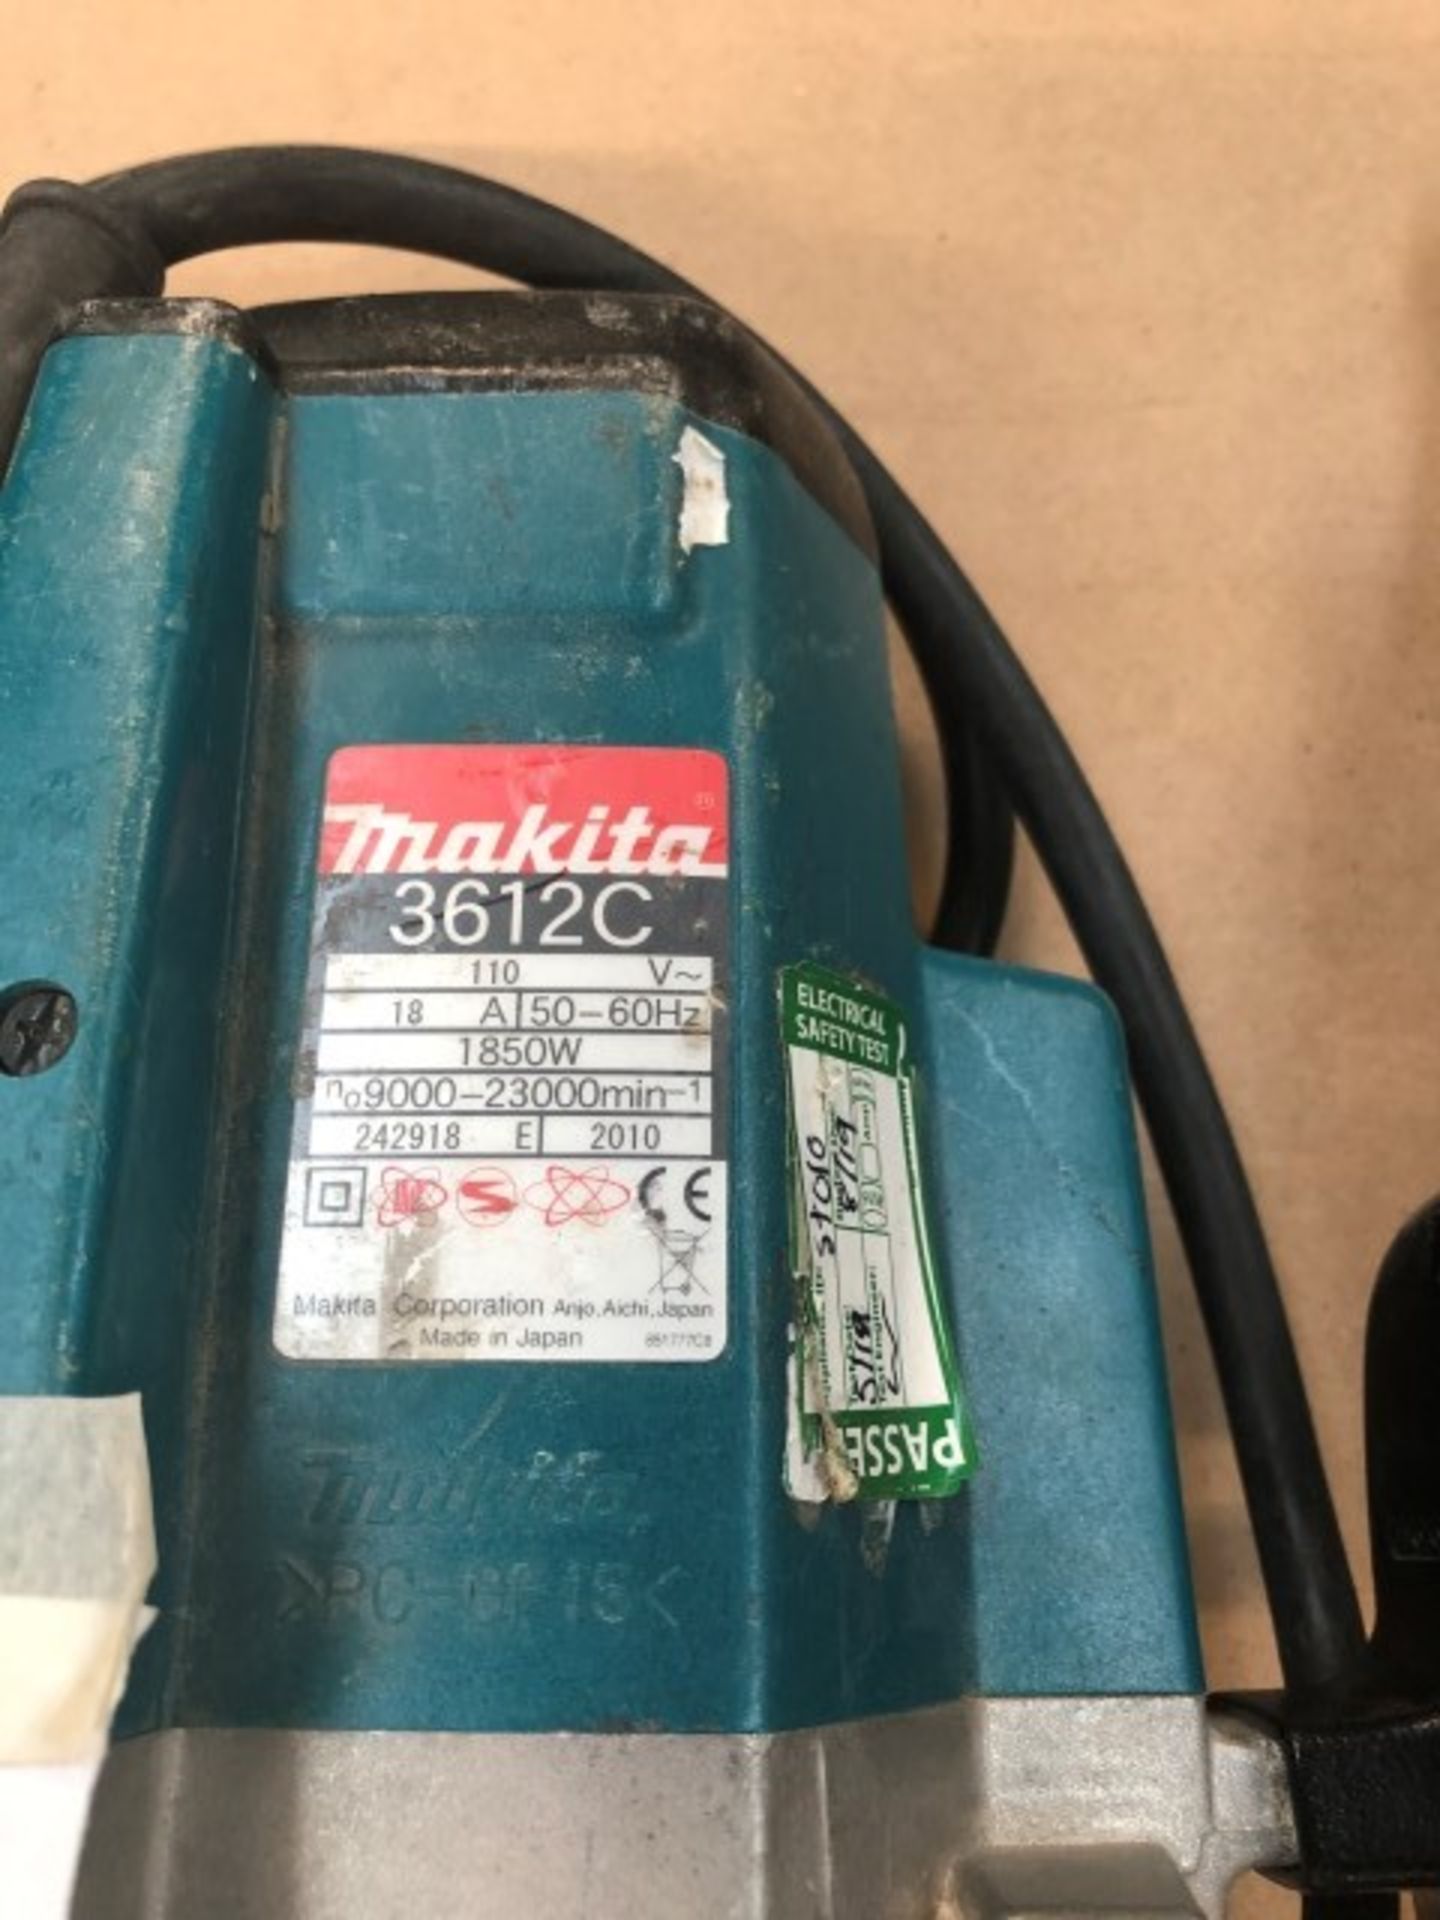 Makita 3612C router - Image 2 of 2